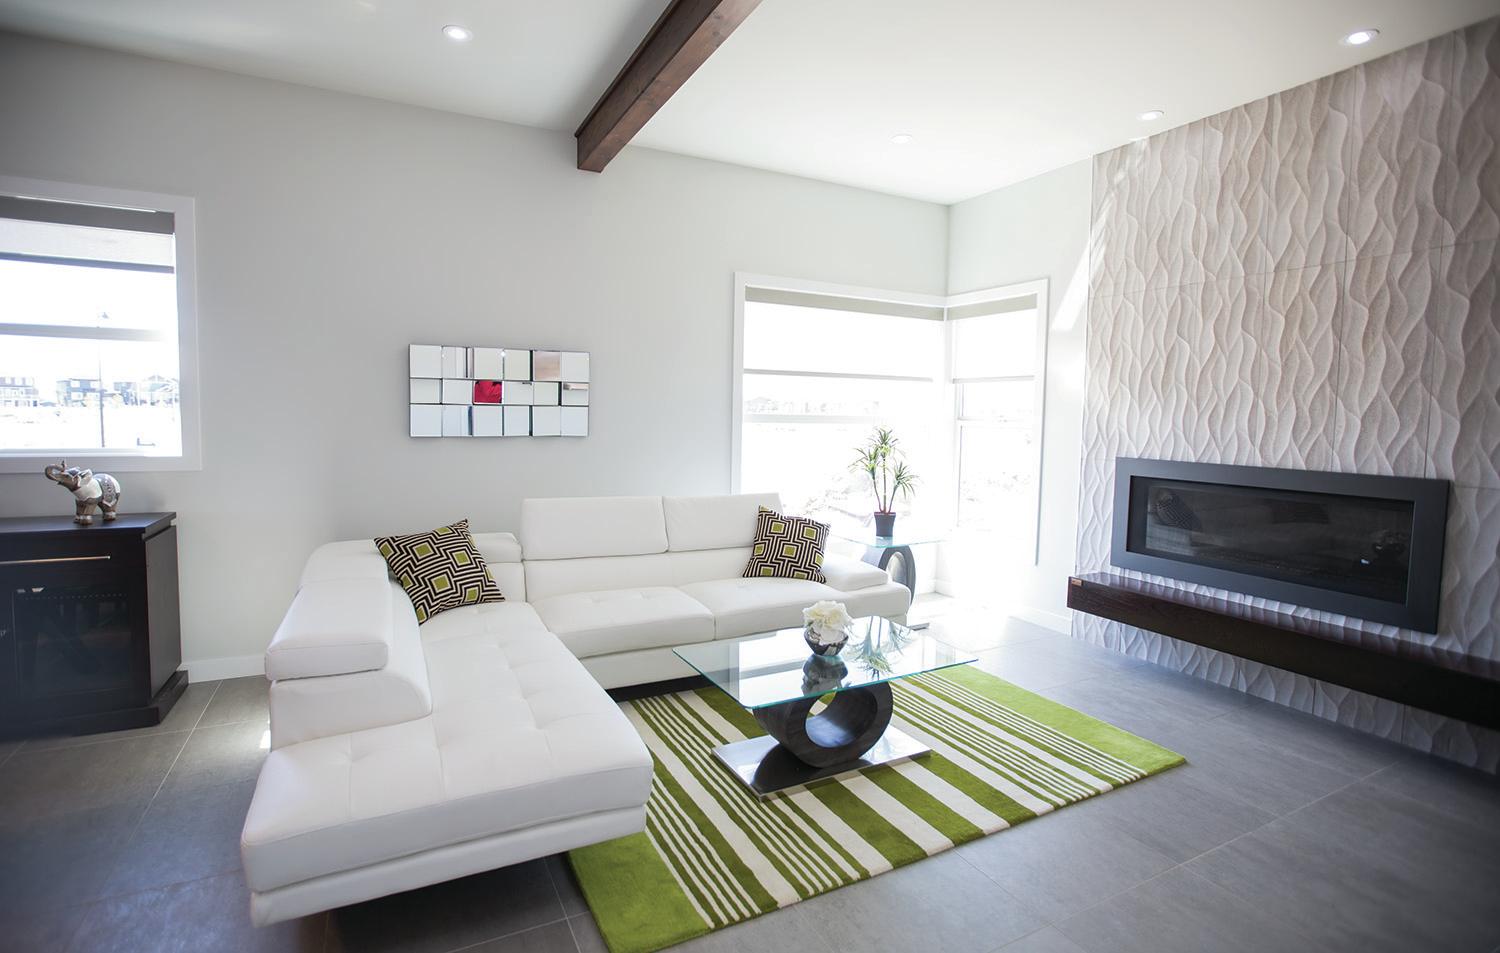 FAMILY ROOM - This bright living room in a Bella Rosa Developments Ltd. show home in Laredo shows how a large window can help bring a space to life.